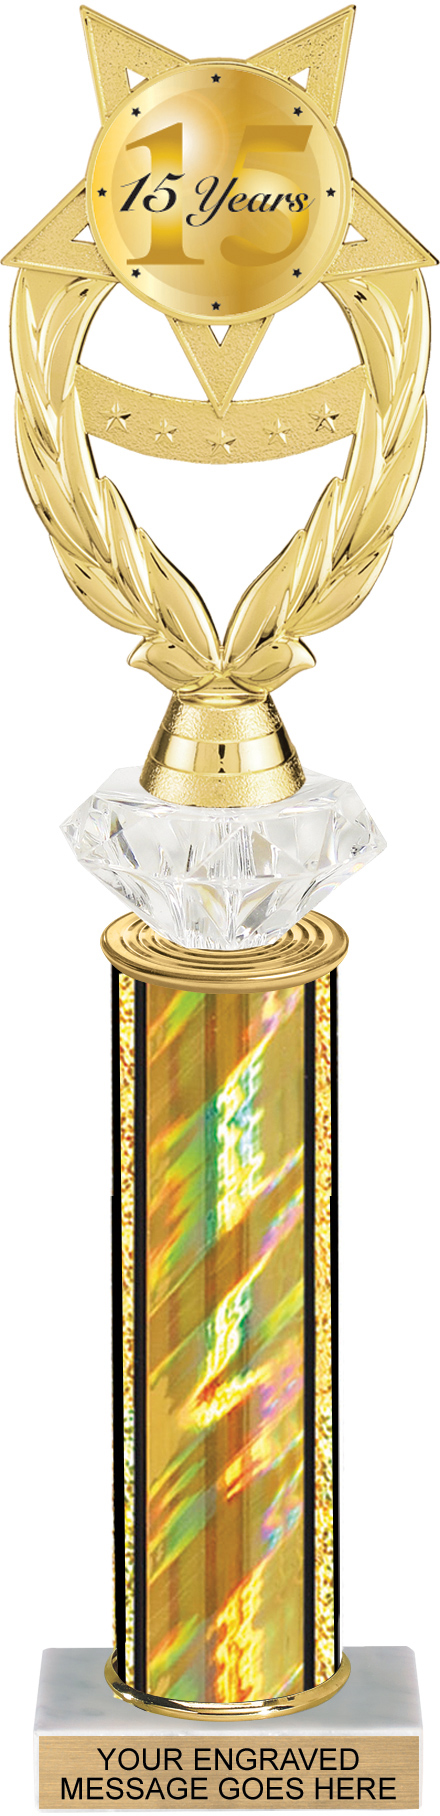 Wreath Victory Color Insert Diamond Riser Trophy - 13.75 inch